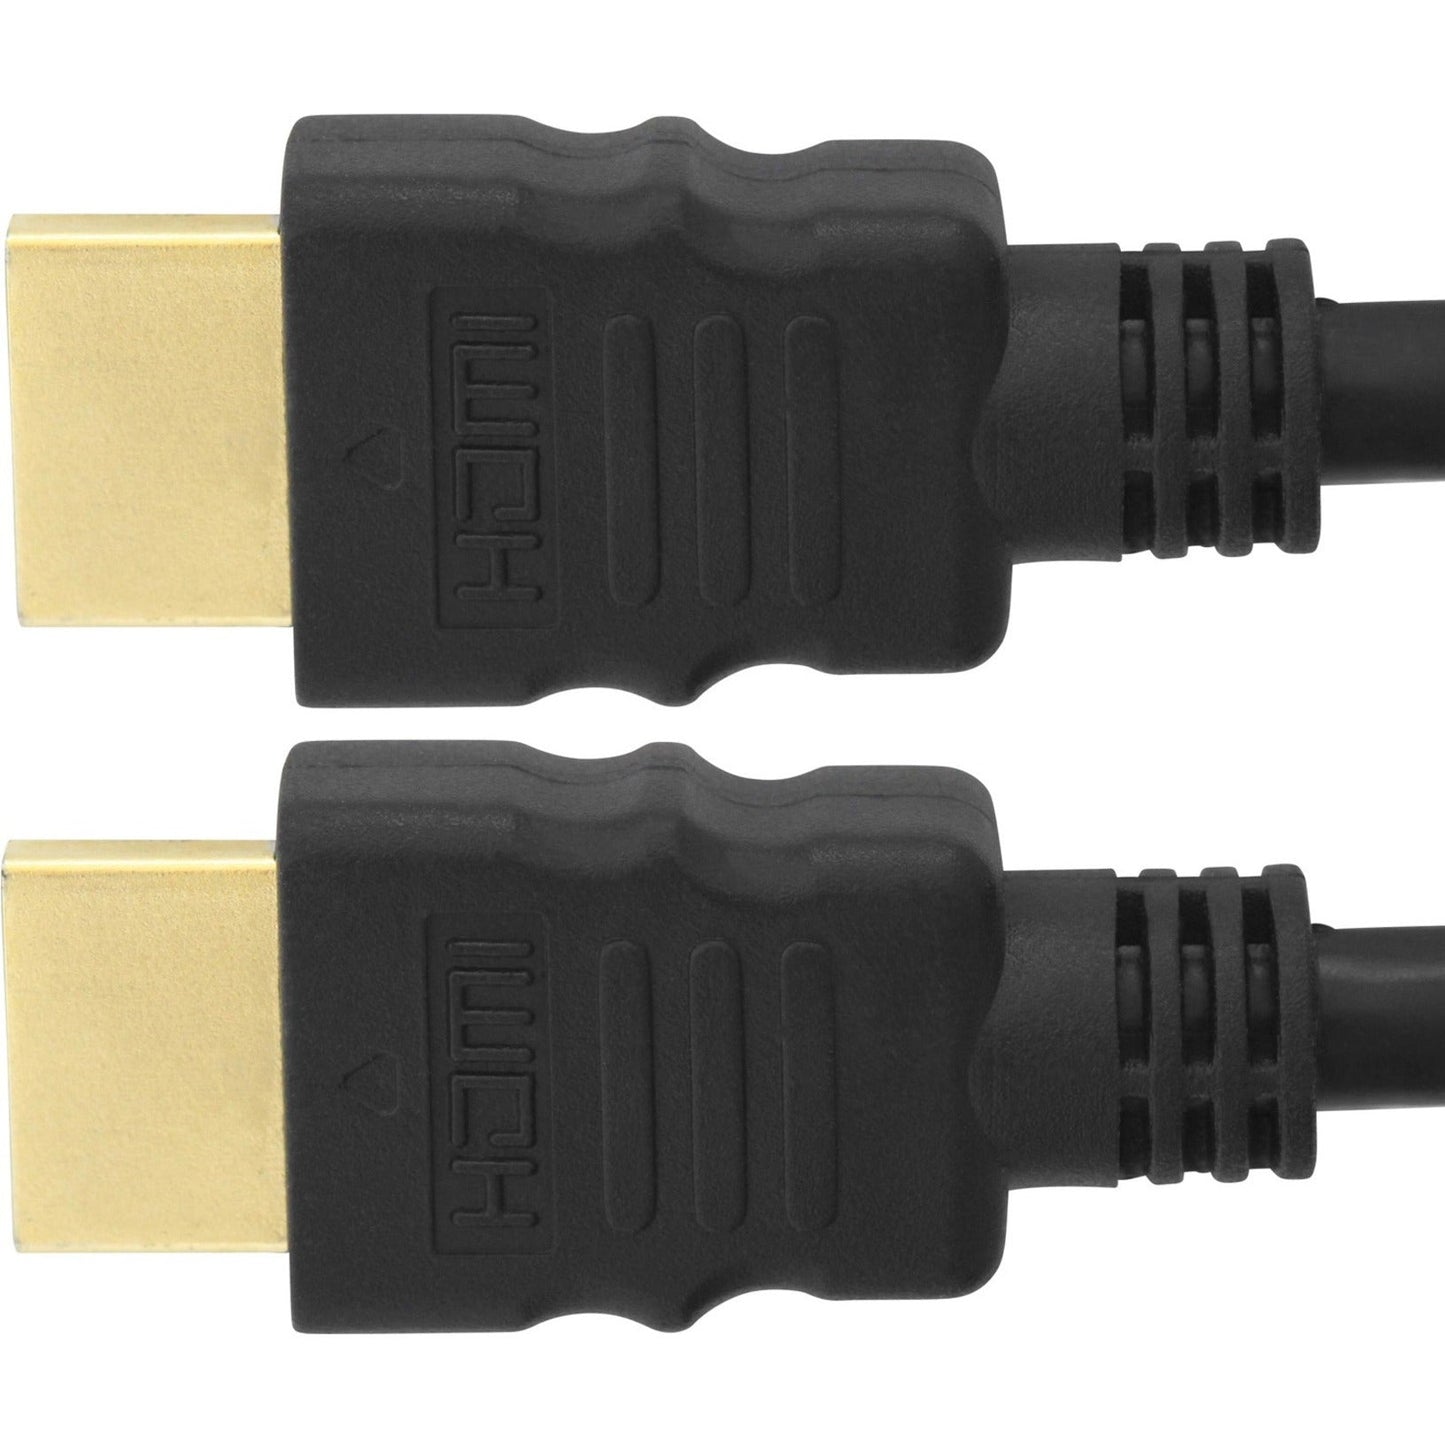 4XEM 6FT 2M High Speed HDMI cable fully supporting 1080p 3D Ethernet and Audio return channel